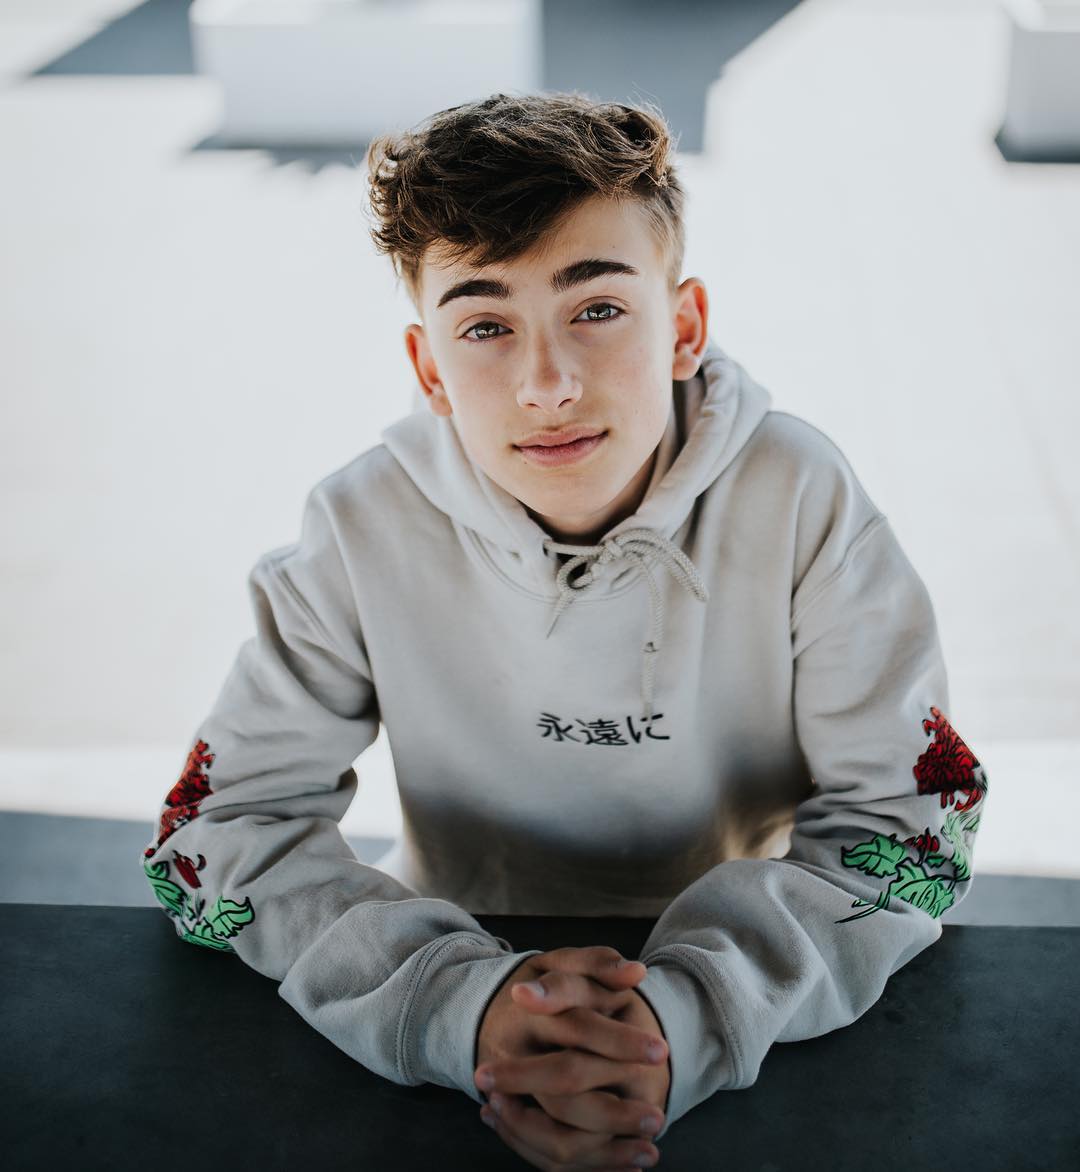 picture of johnny orlando Full HD MAPS Locations World